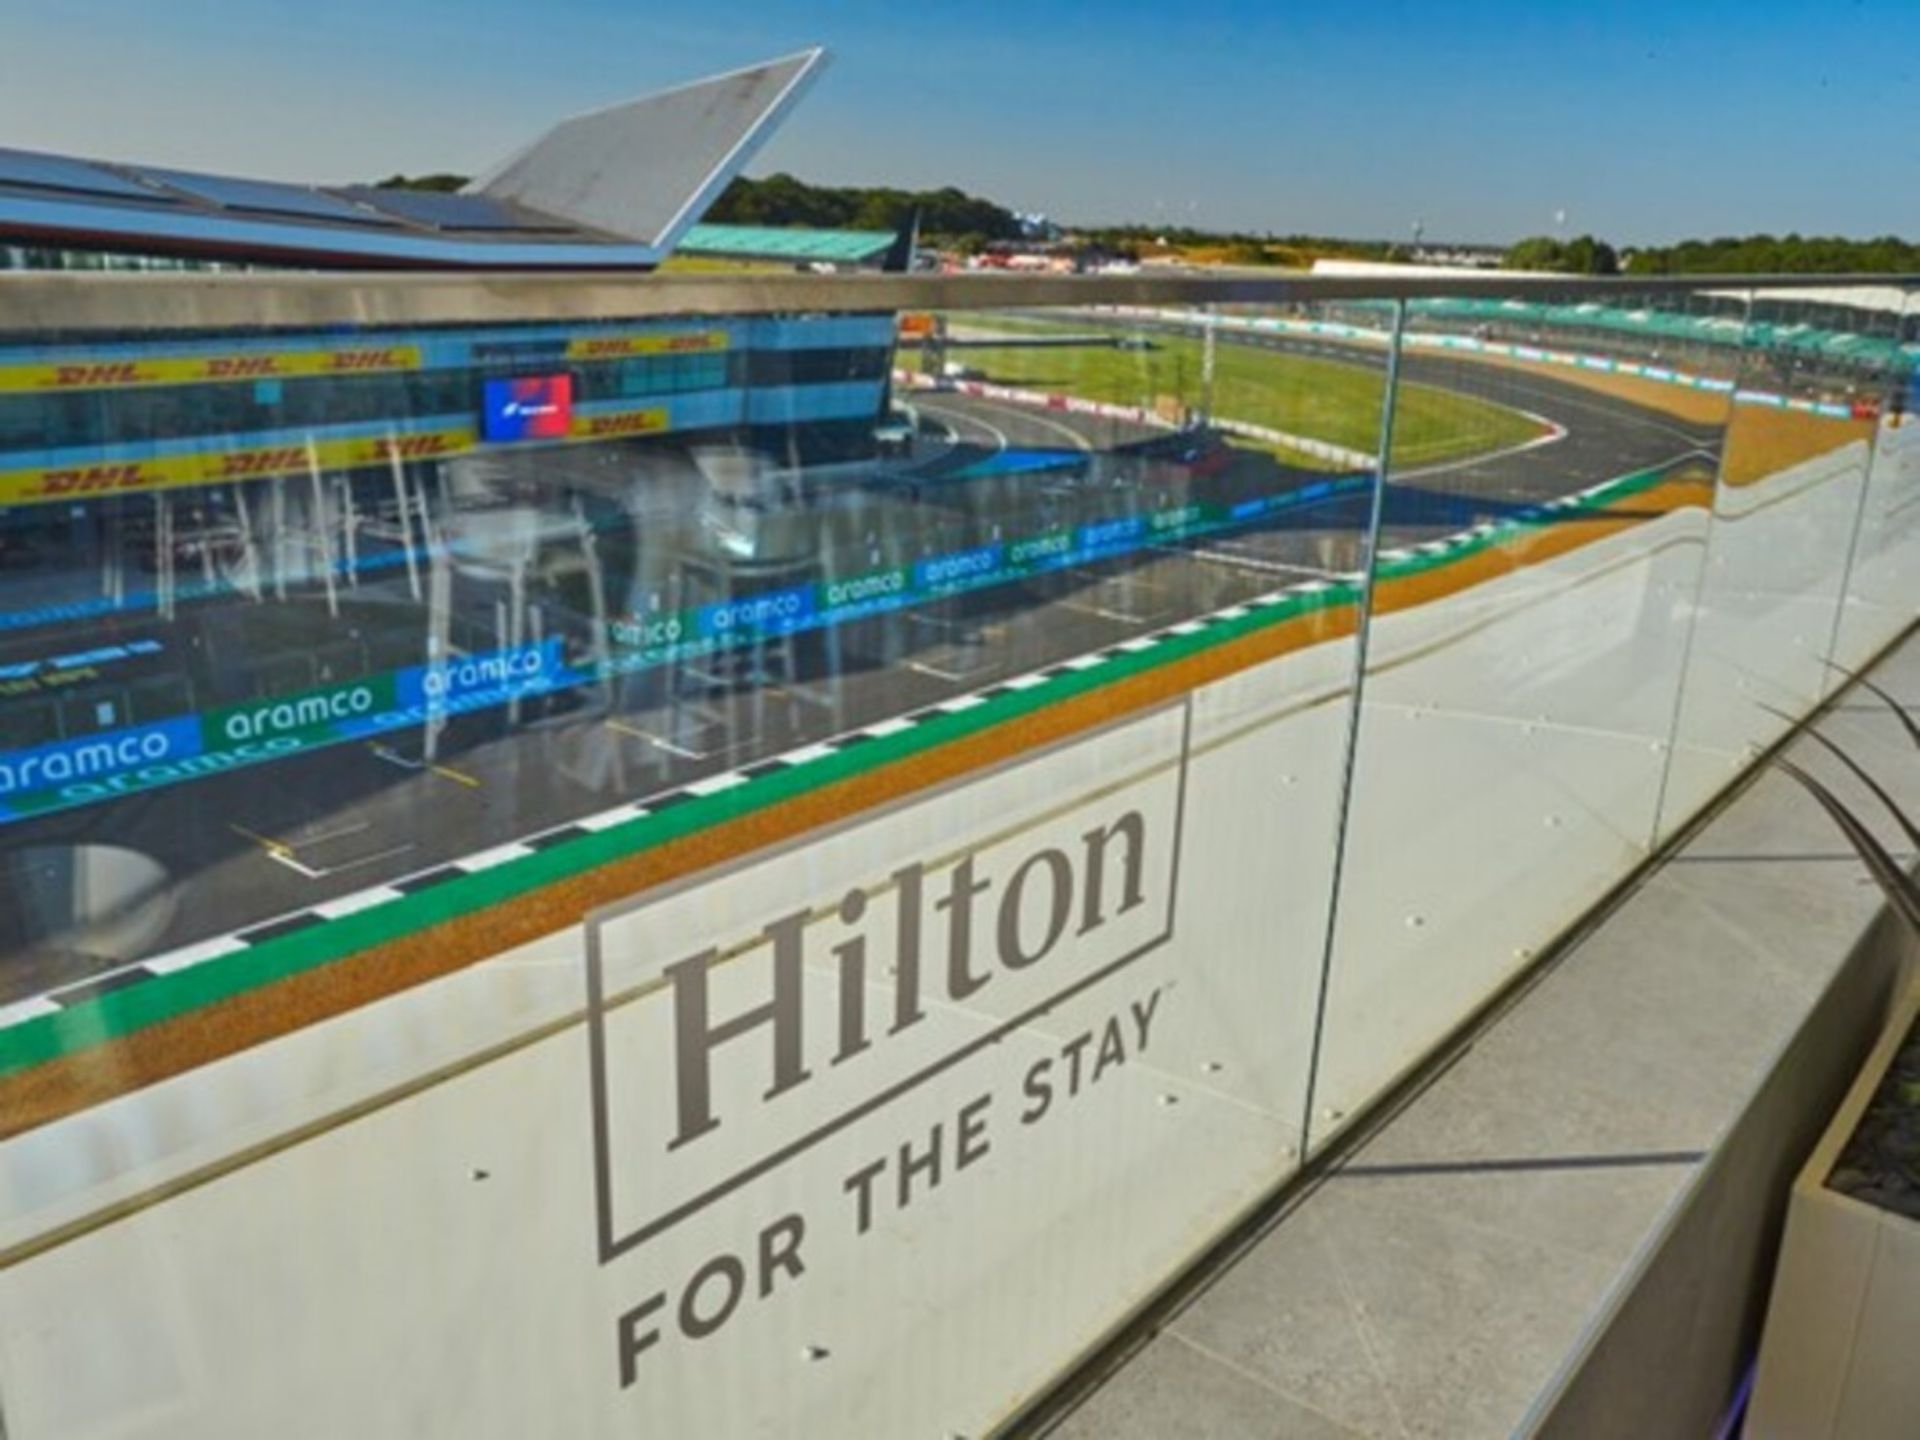 Silverstone Rooftop VIP Experience for Friday Practice - NO VAT! - Image 4 of 5